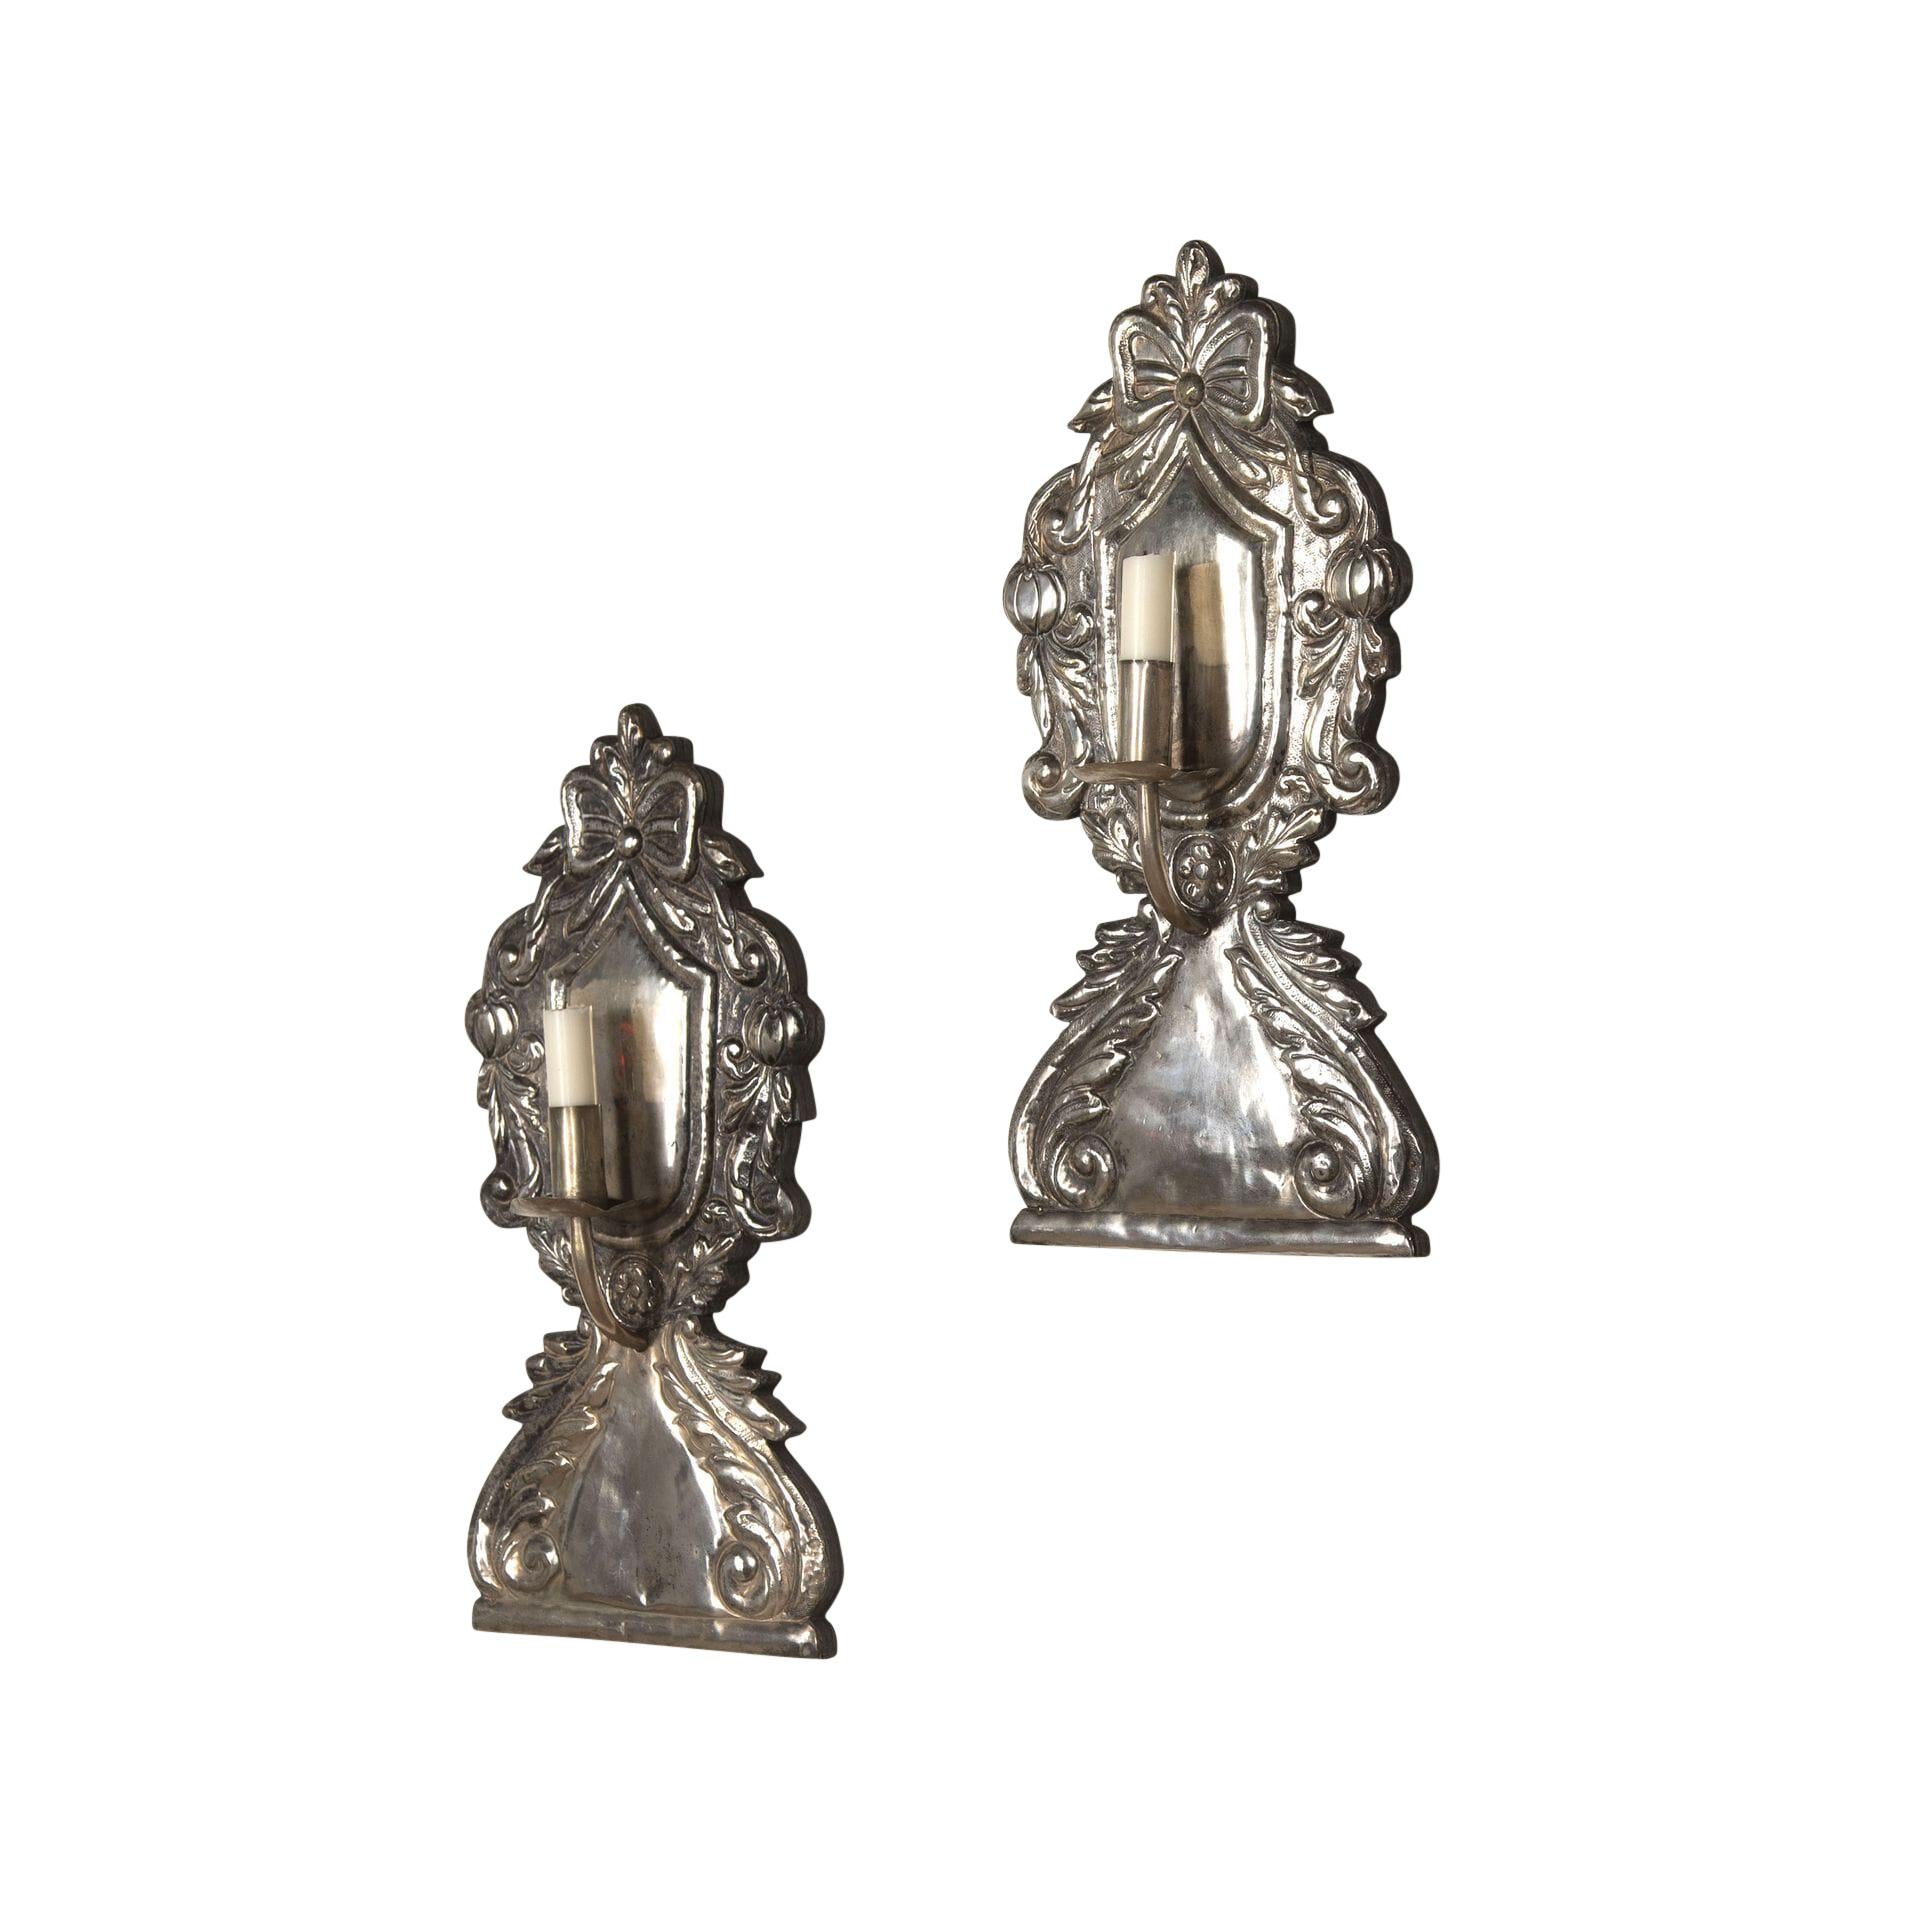 Pair of 19th century pressed metal wall lights with decorative fruit and bow design.